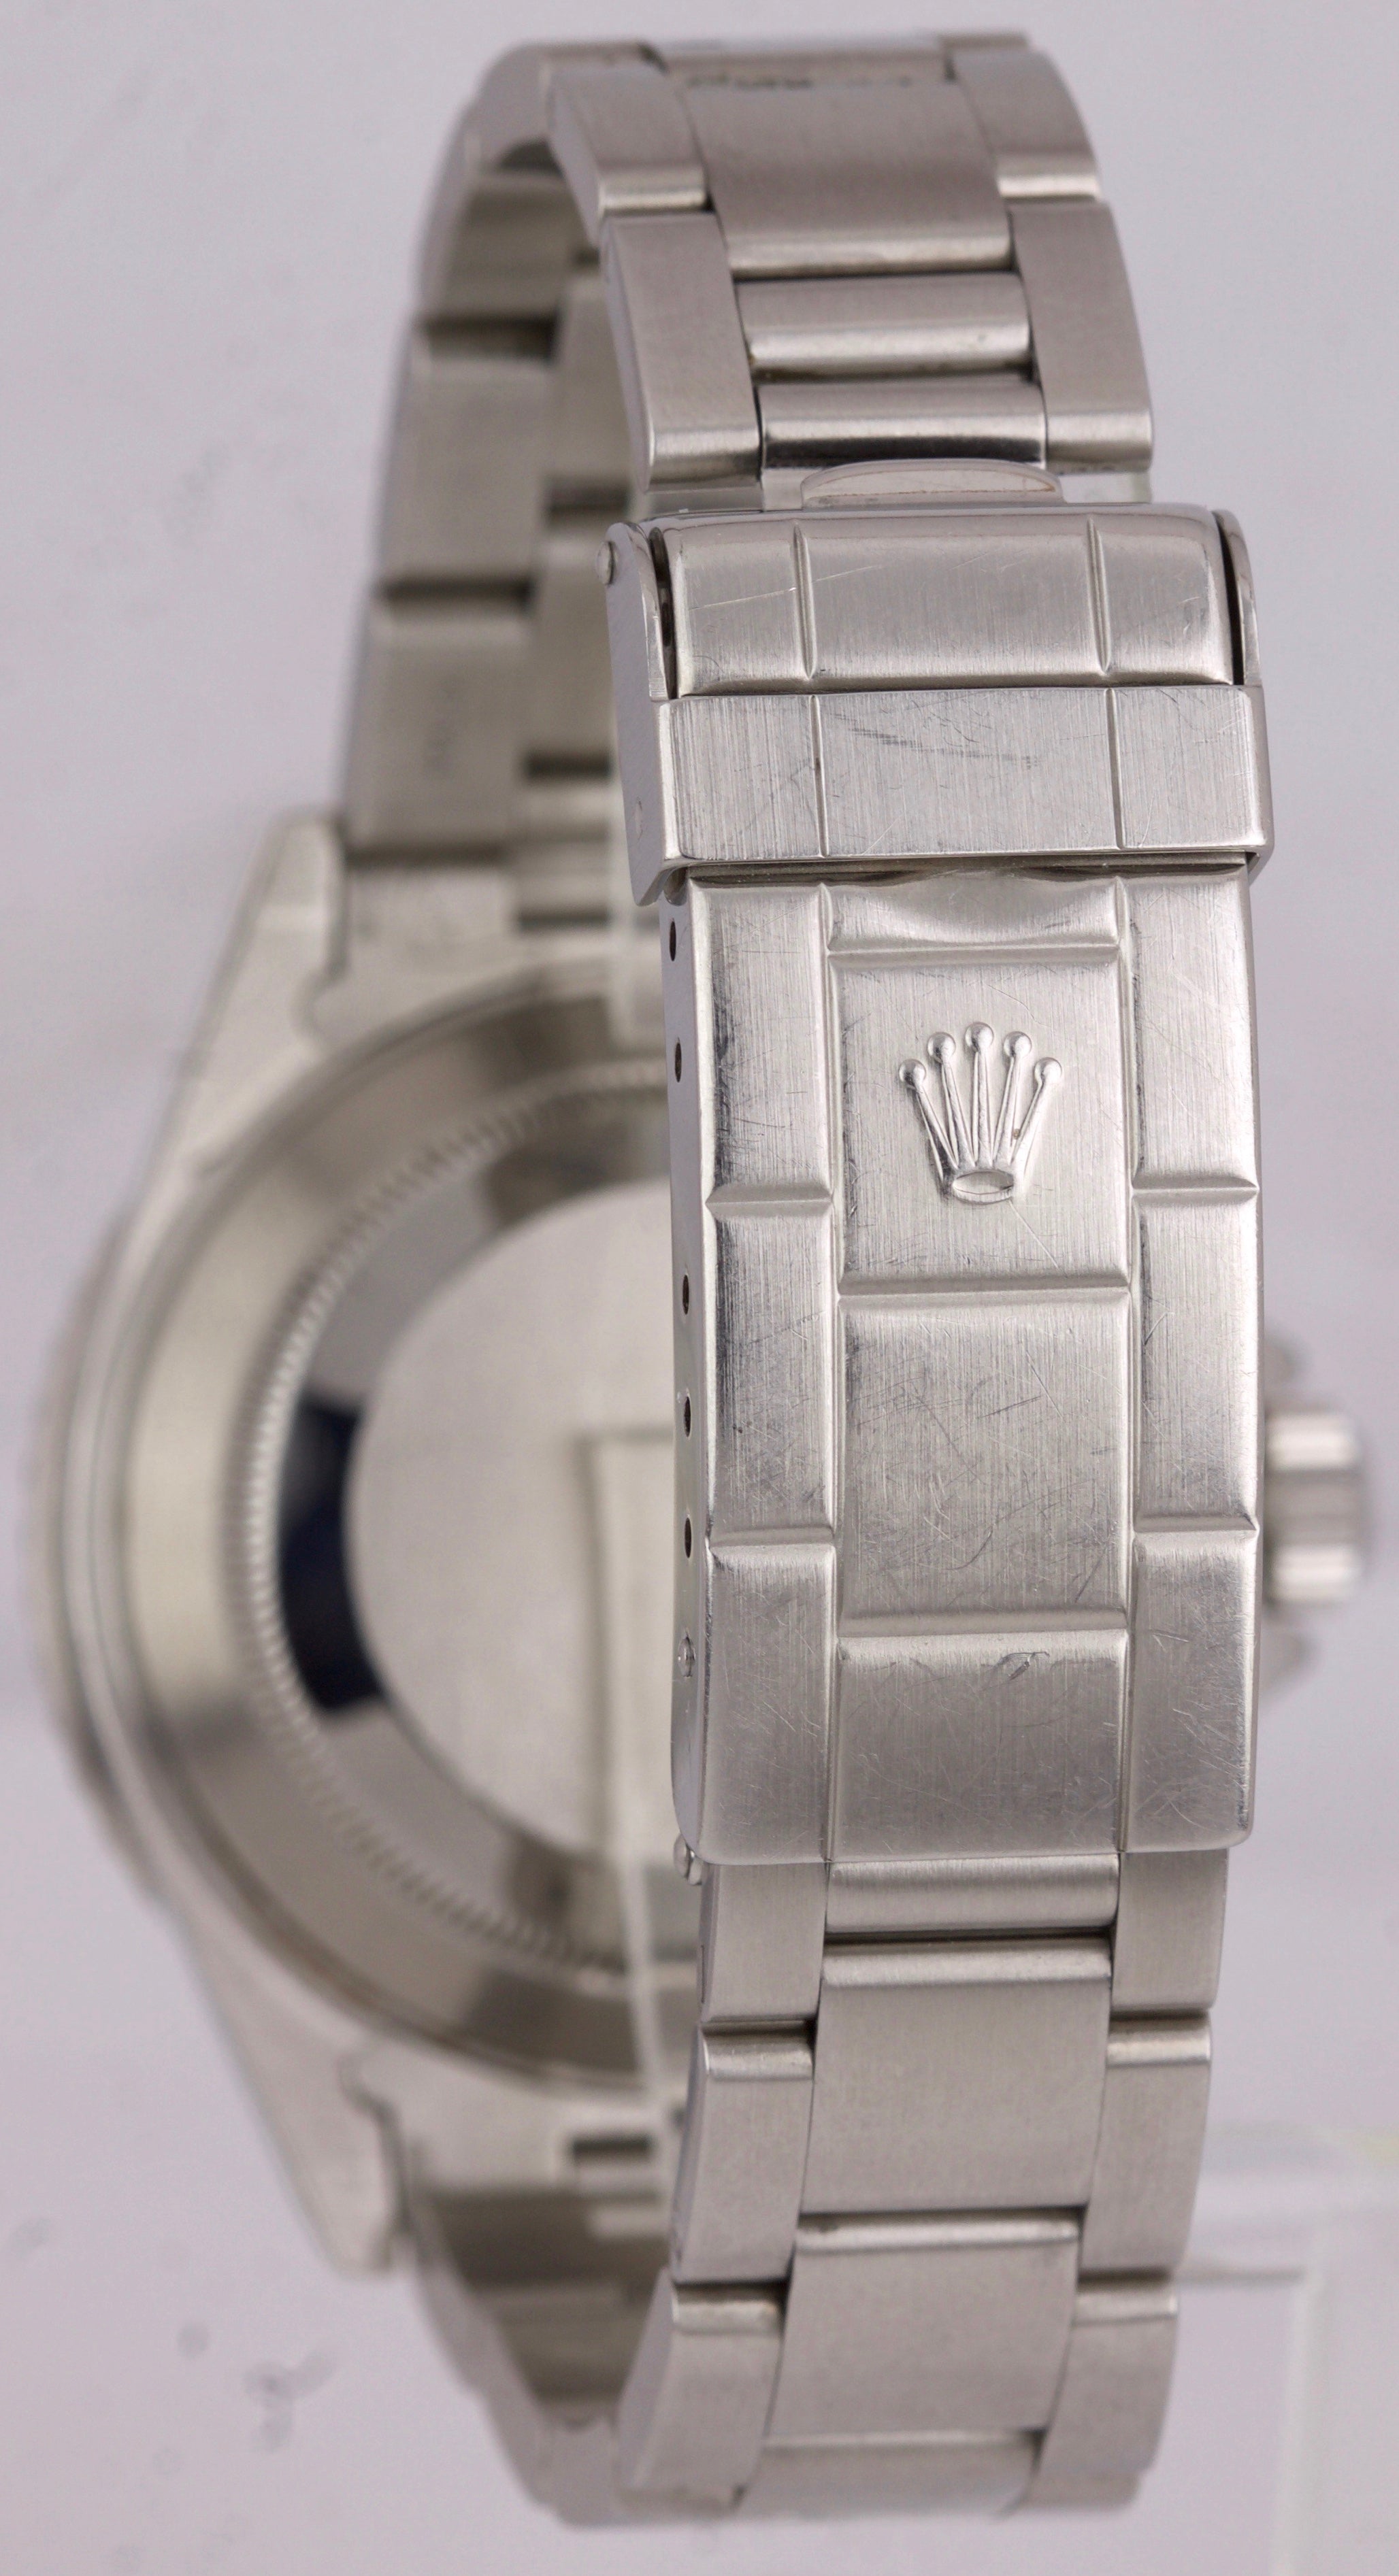 UNPOLISHED 1996 Rolex Submariner Date Stainless Steel 40mm Dive Watch 16610 B+P